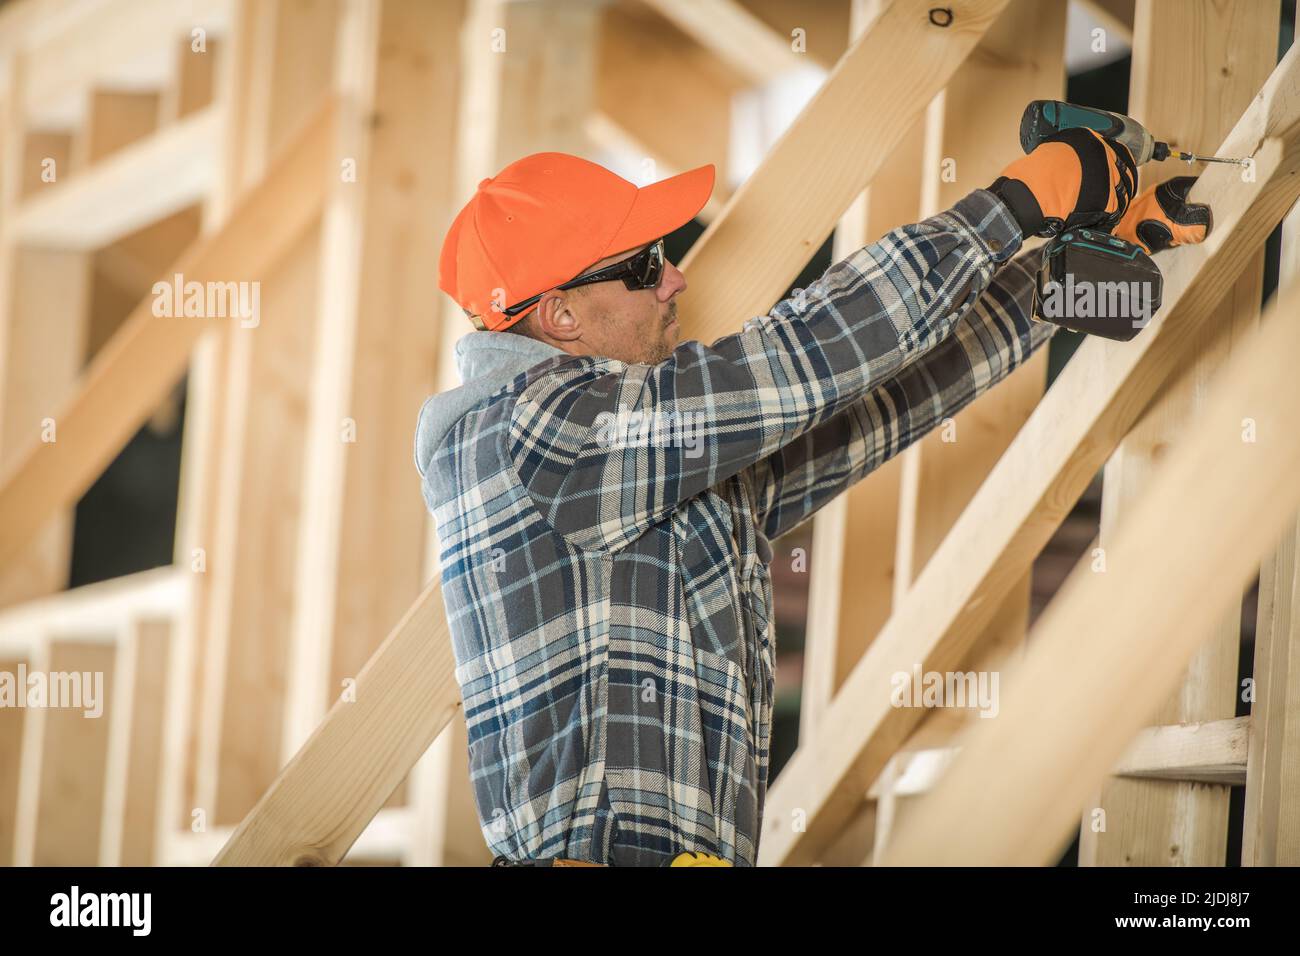 Carpenter Building the Skeleton of a New Wooden Residential House Using Electric Screwdriver to Secure Wooden Frame Beams with Screws. Construction Si Stock Photo